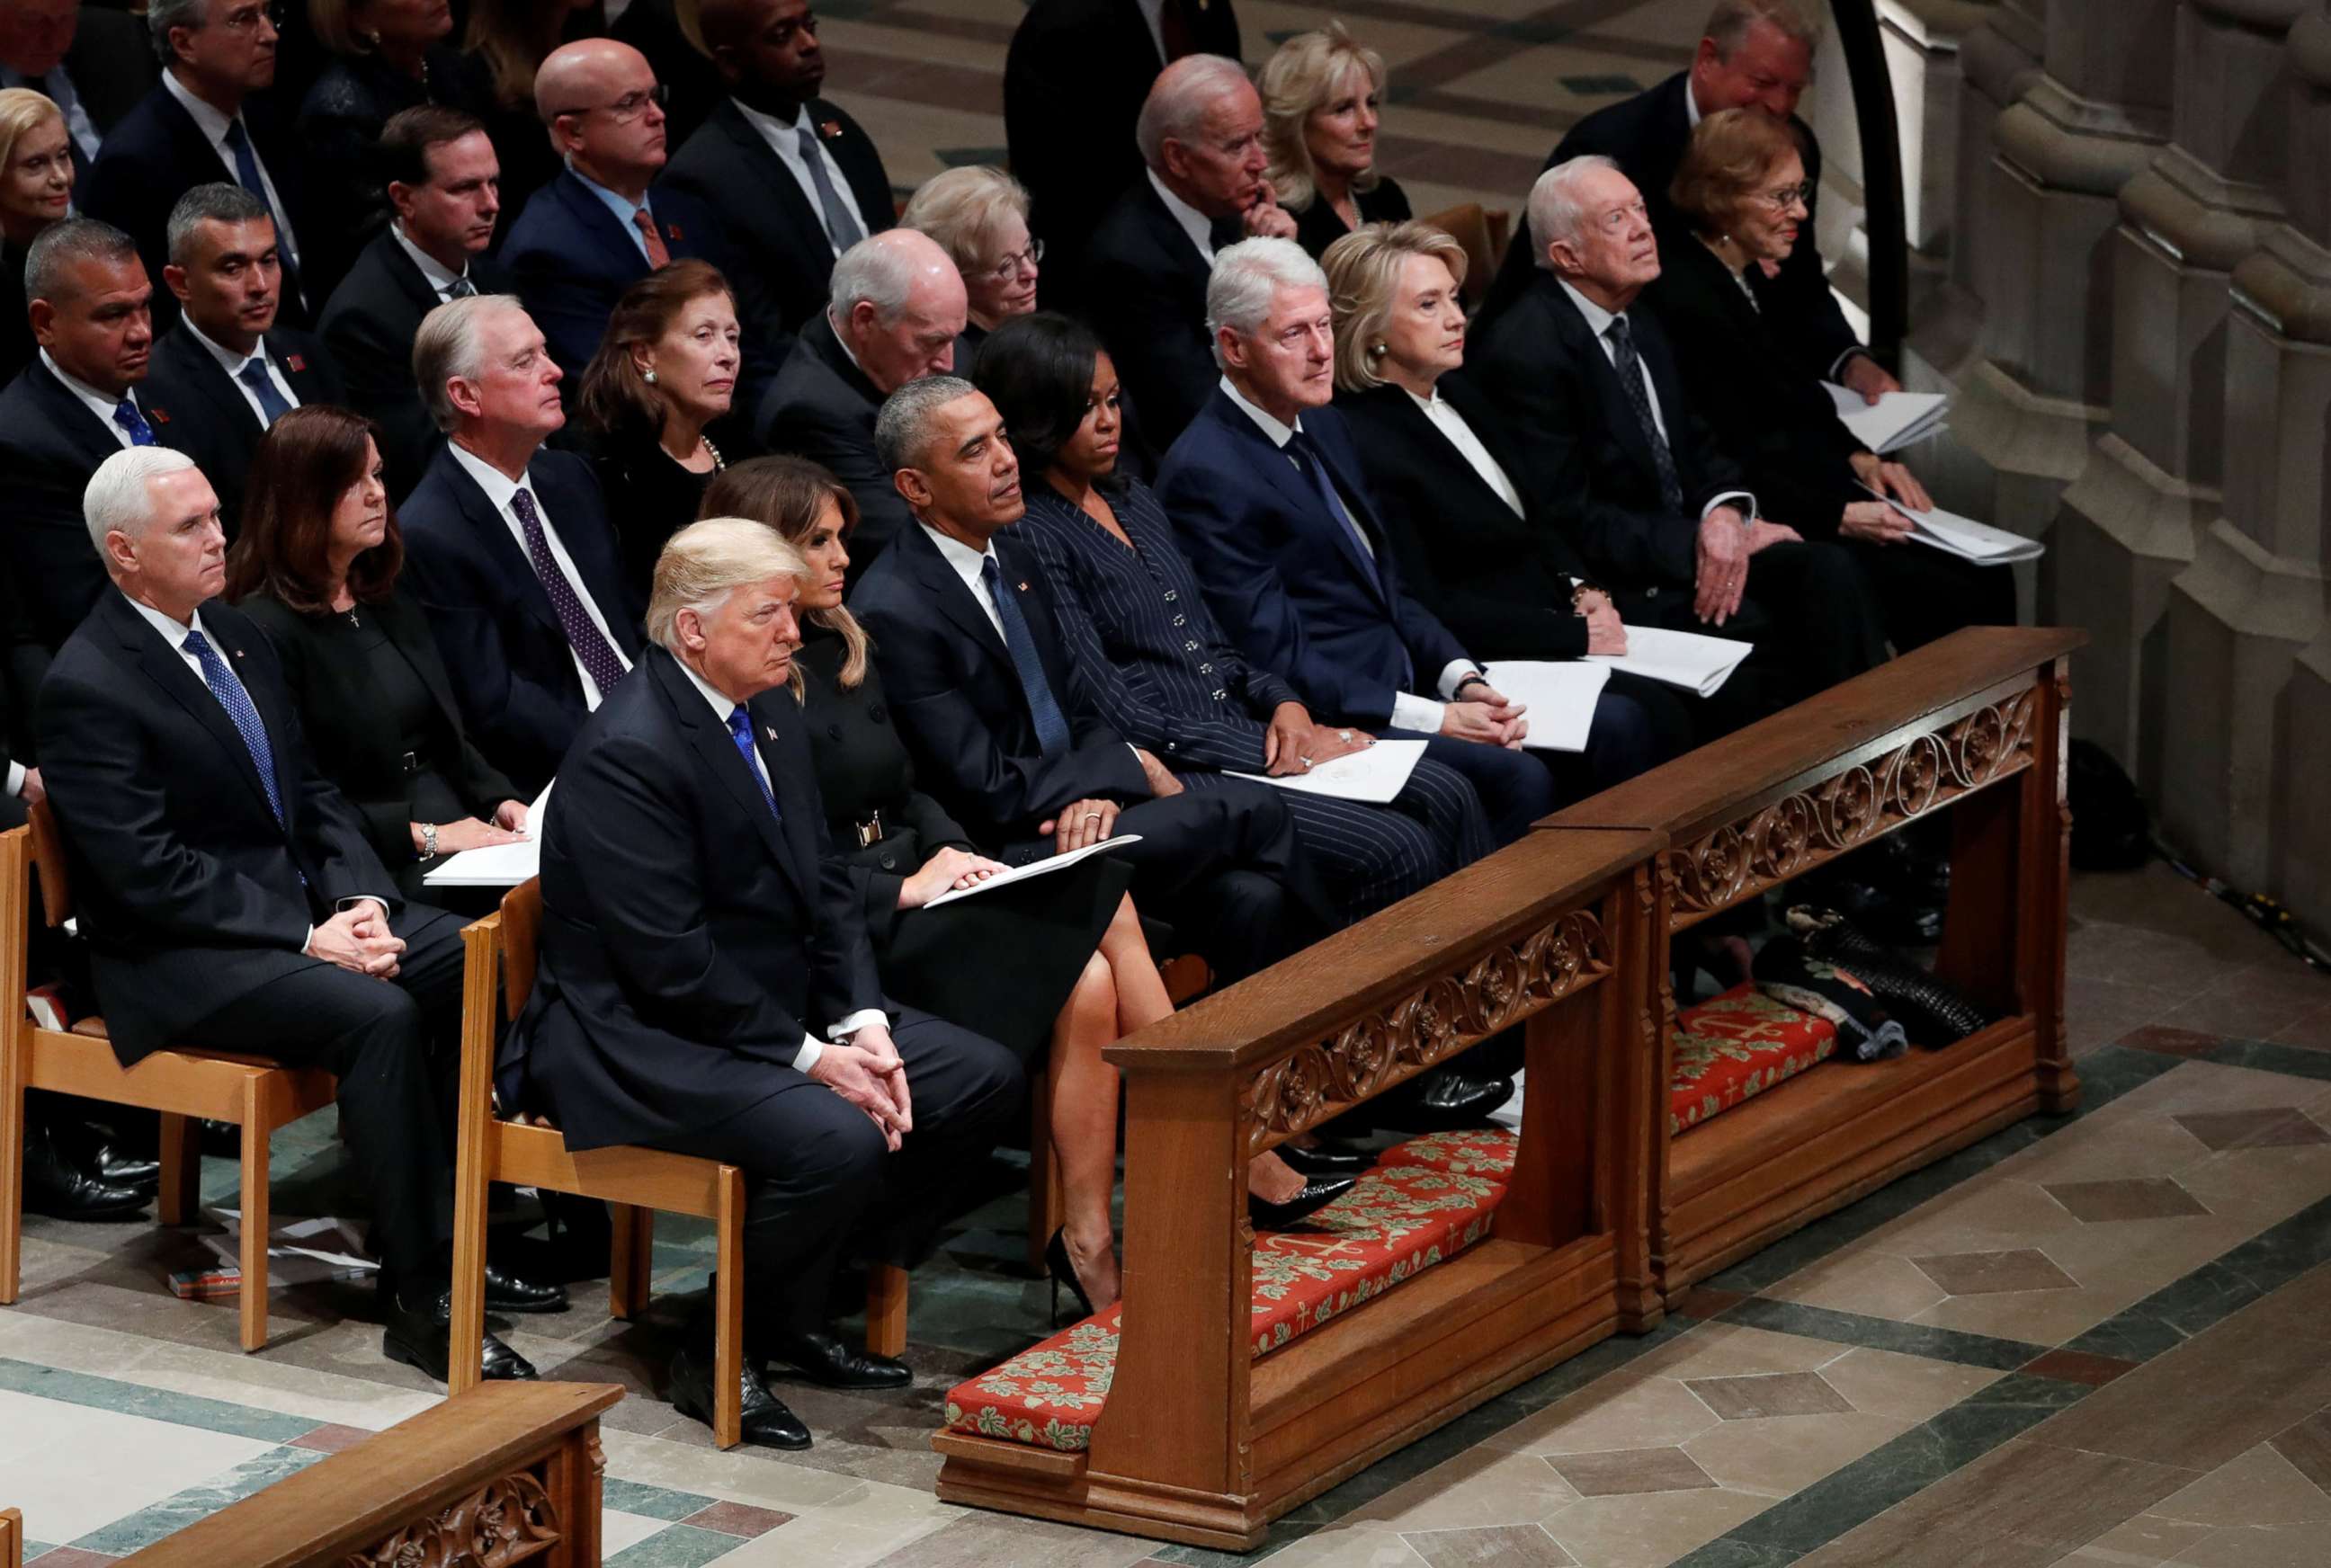 PHOTO: President Donald Trump and his wife join other former presidents for the funeral of former President George H.W. Bush, Dec. 5, 2018 in Washington.